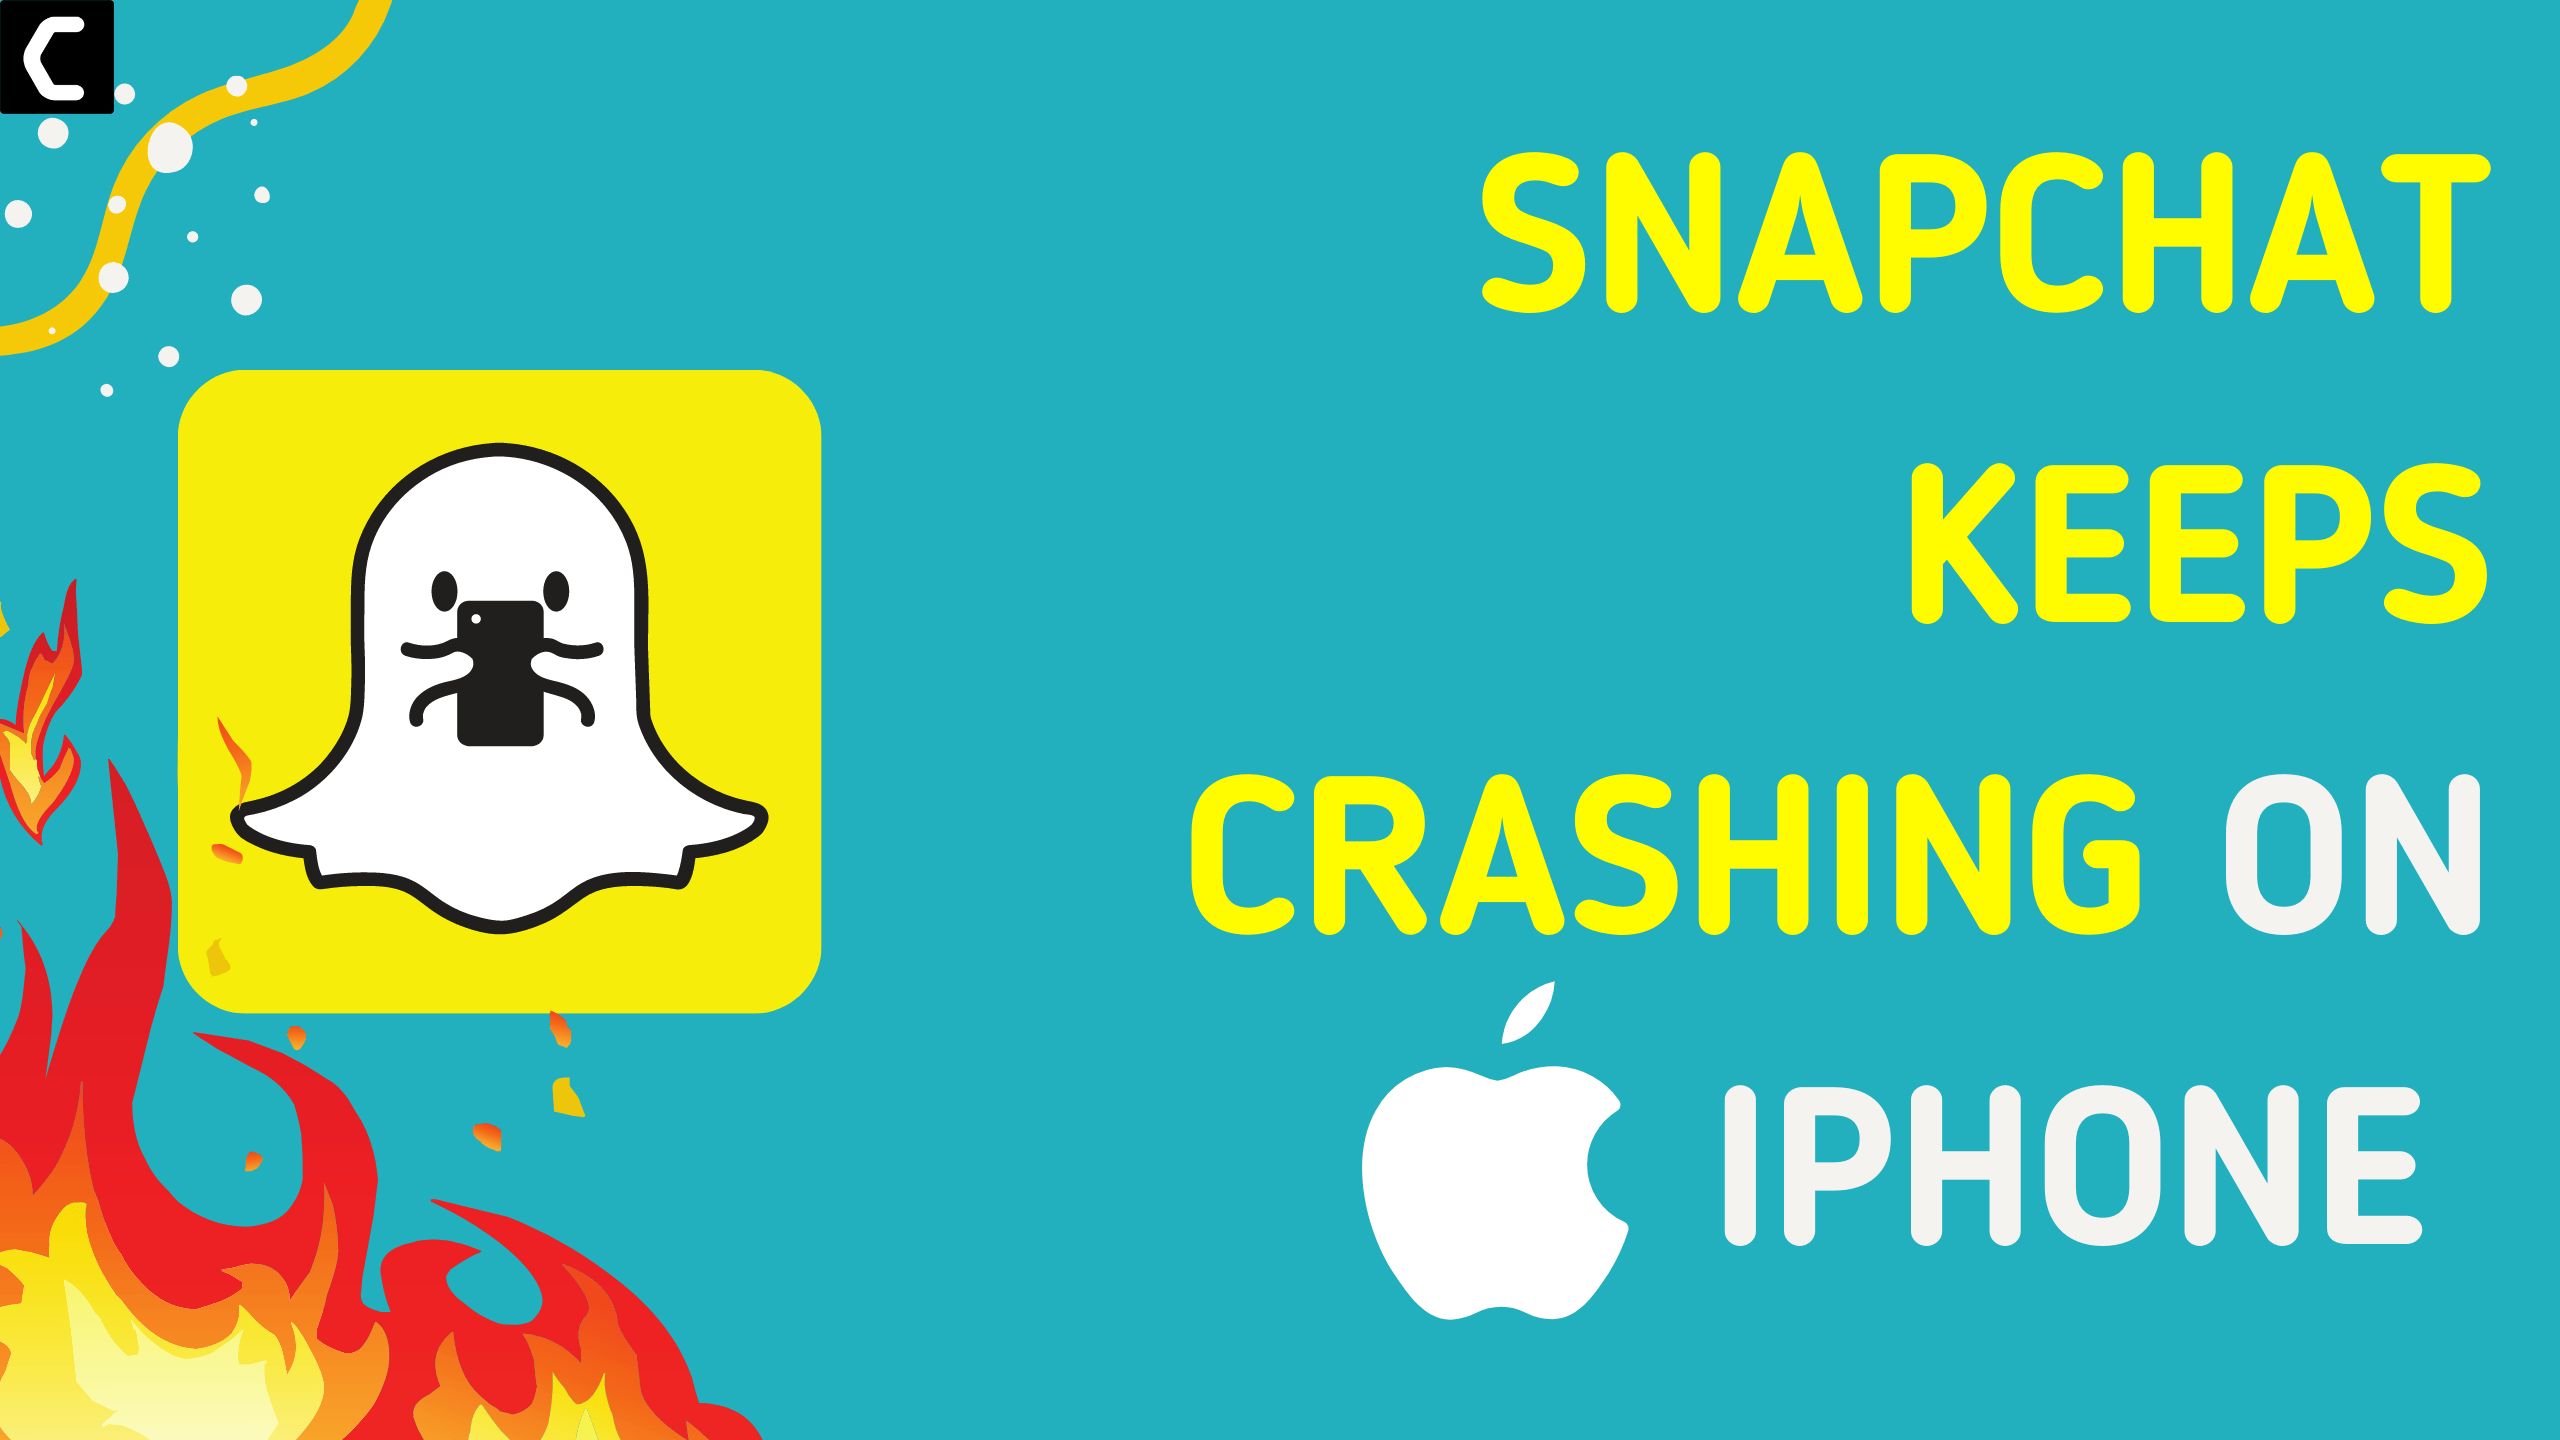 Snapchat keeps Crashing on iPhone Best Guide